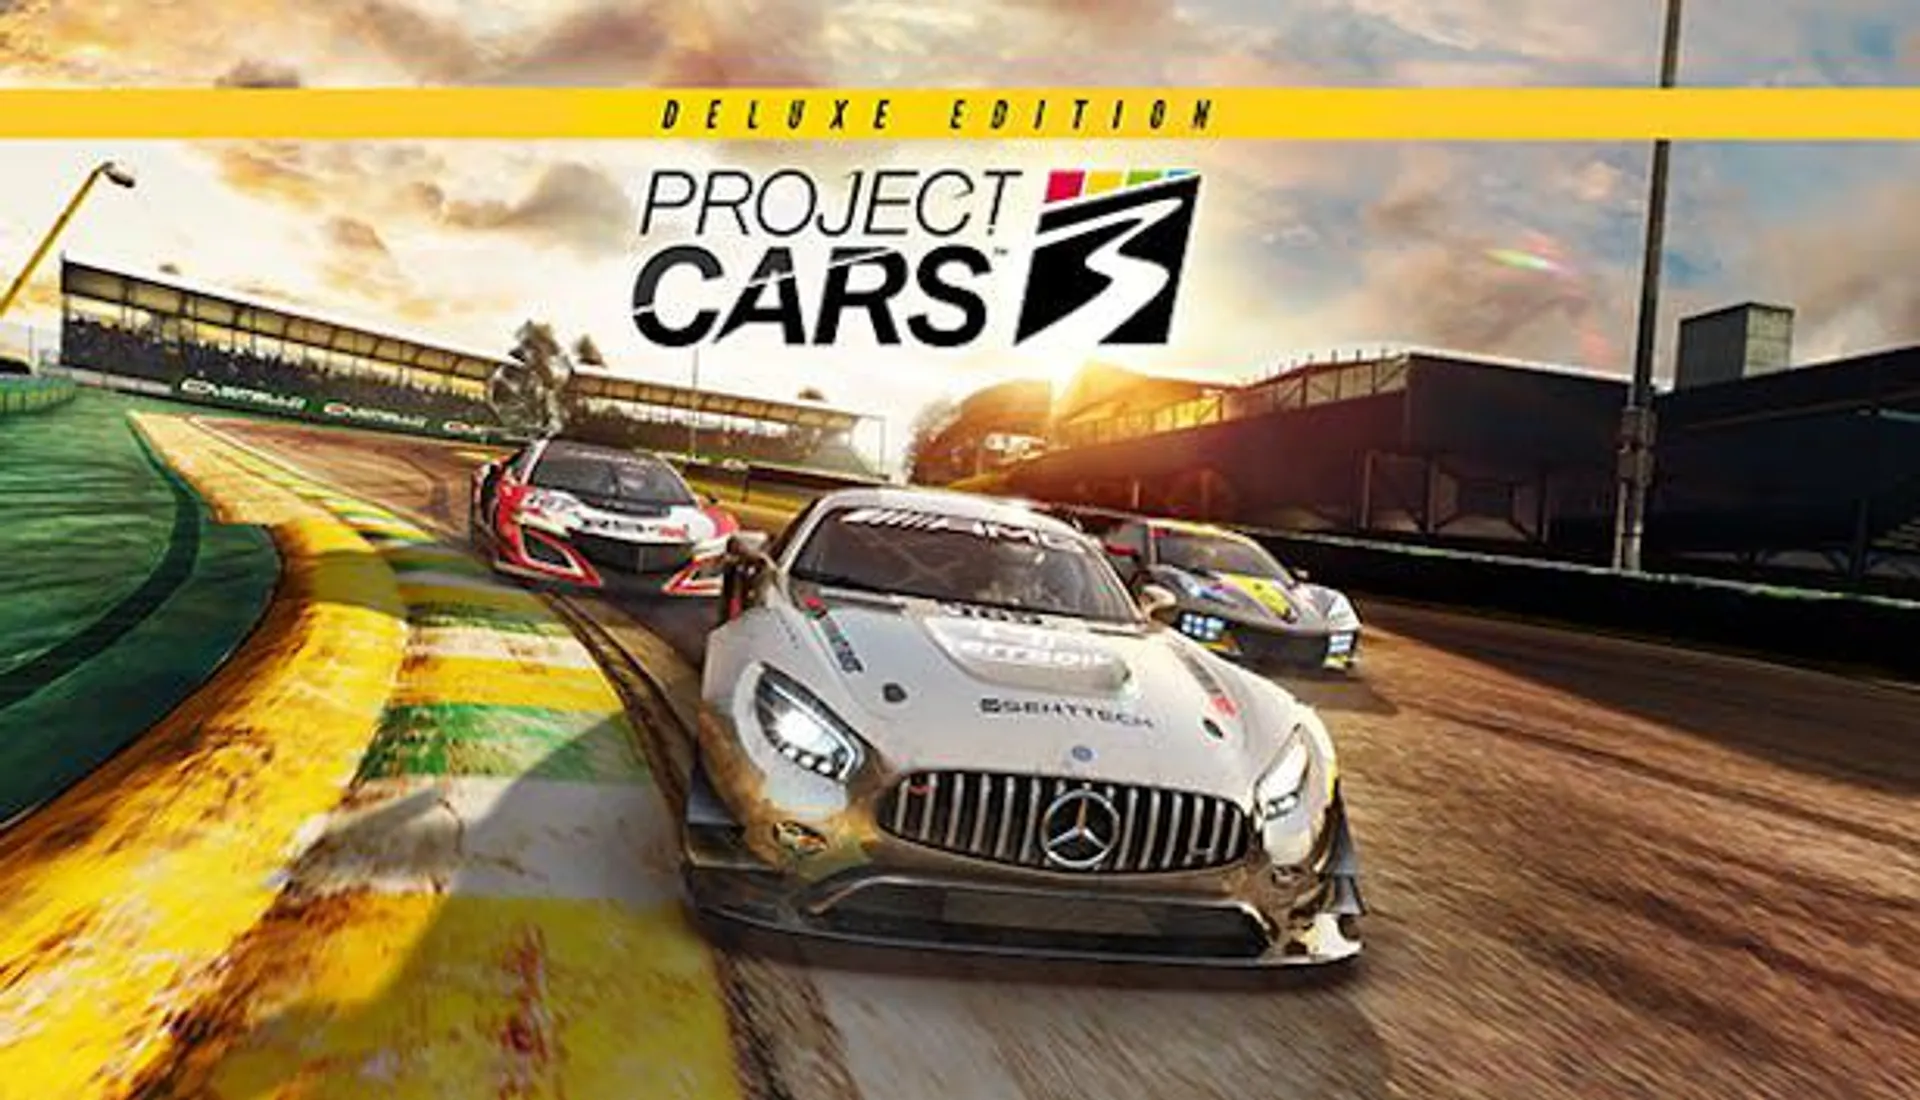 Project CARS 3: Deluxe Edition